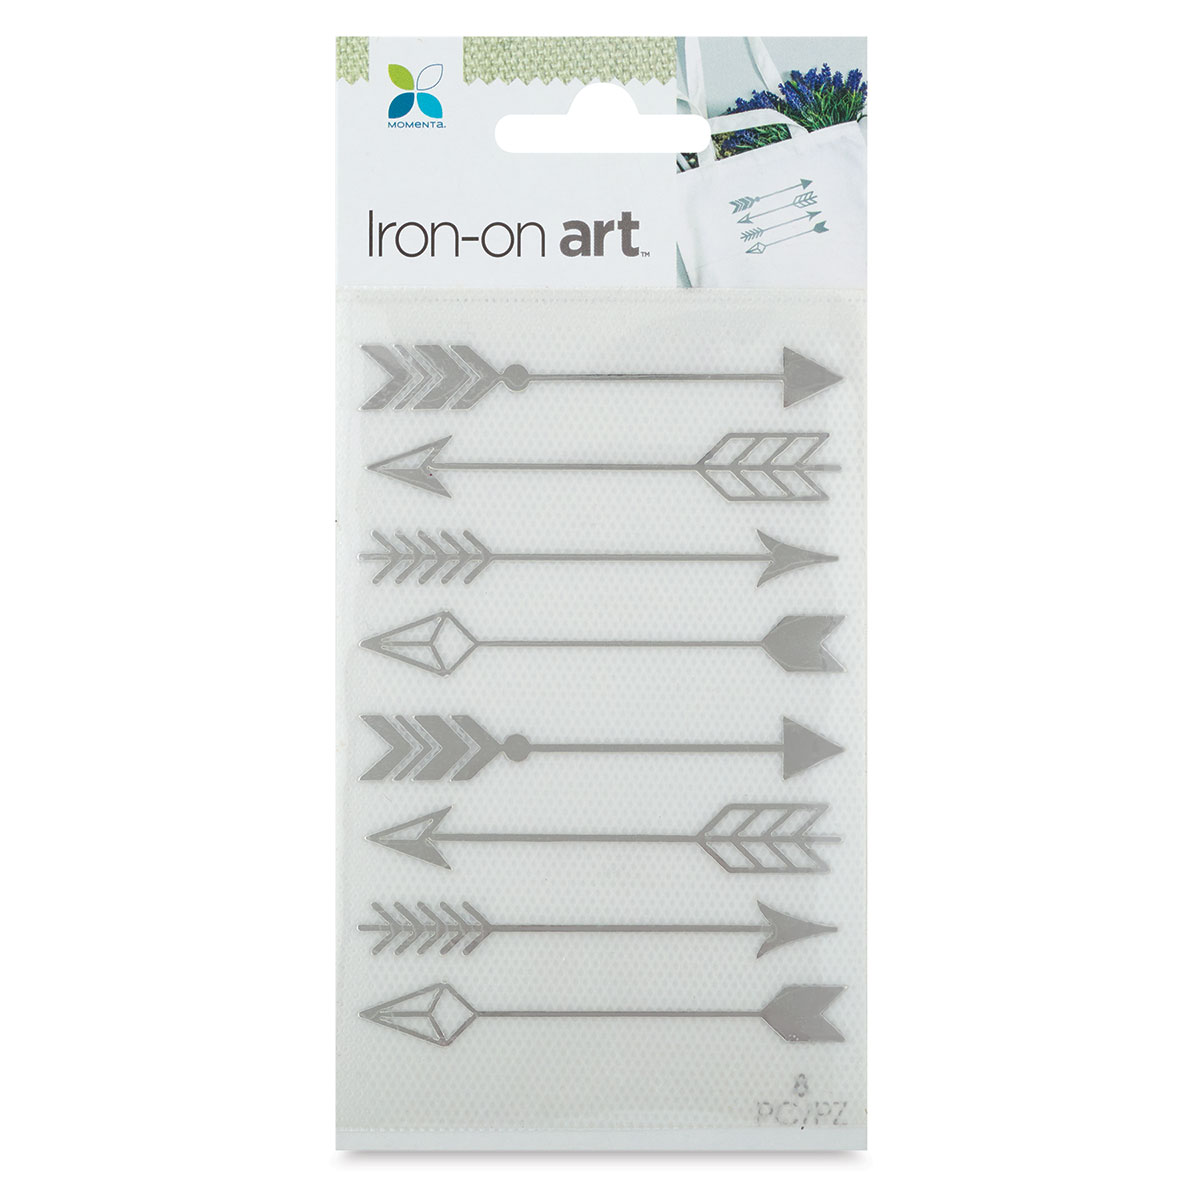 Iron-On Transfer Sheets and Vinyl